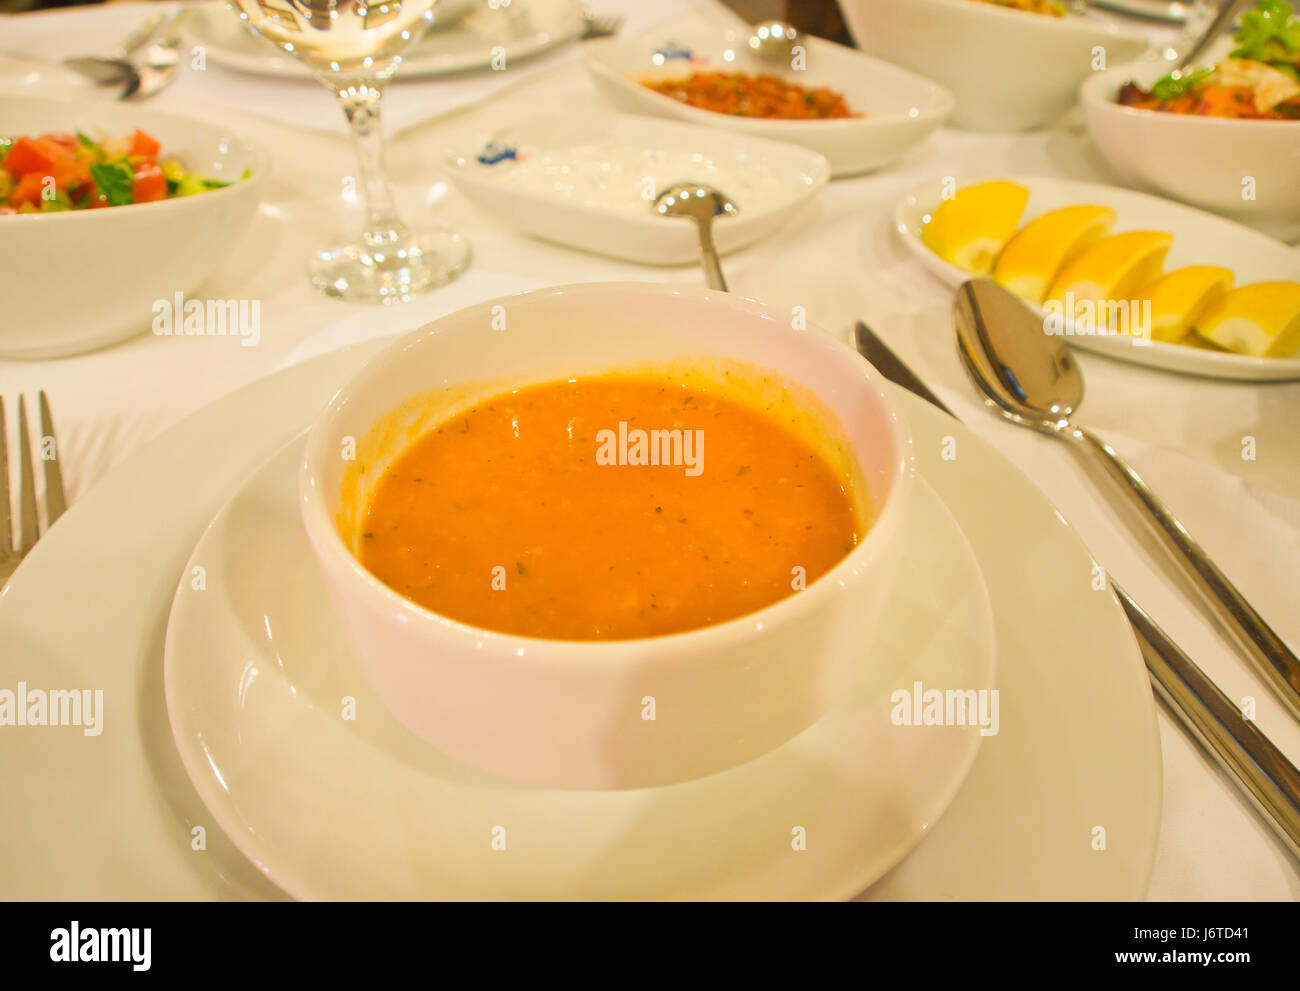 Fine dining in Baku Azerbaijan, red lentil soup and starters on an elegant table Stock Photo